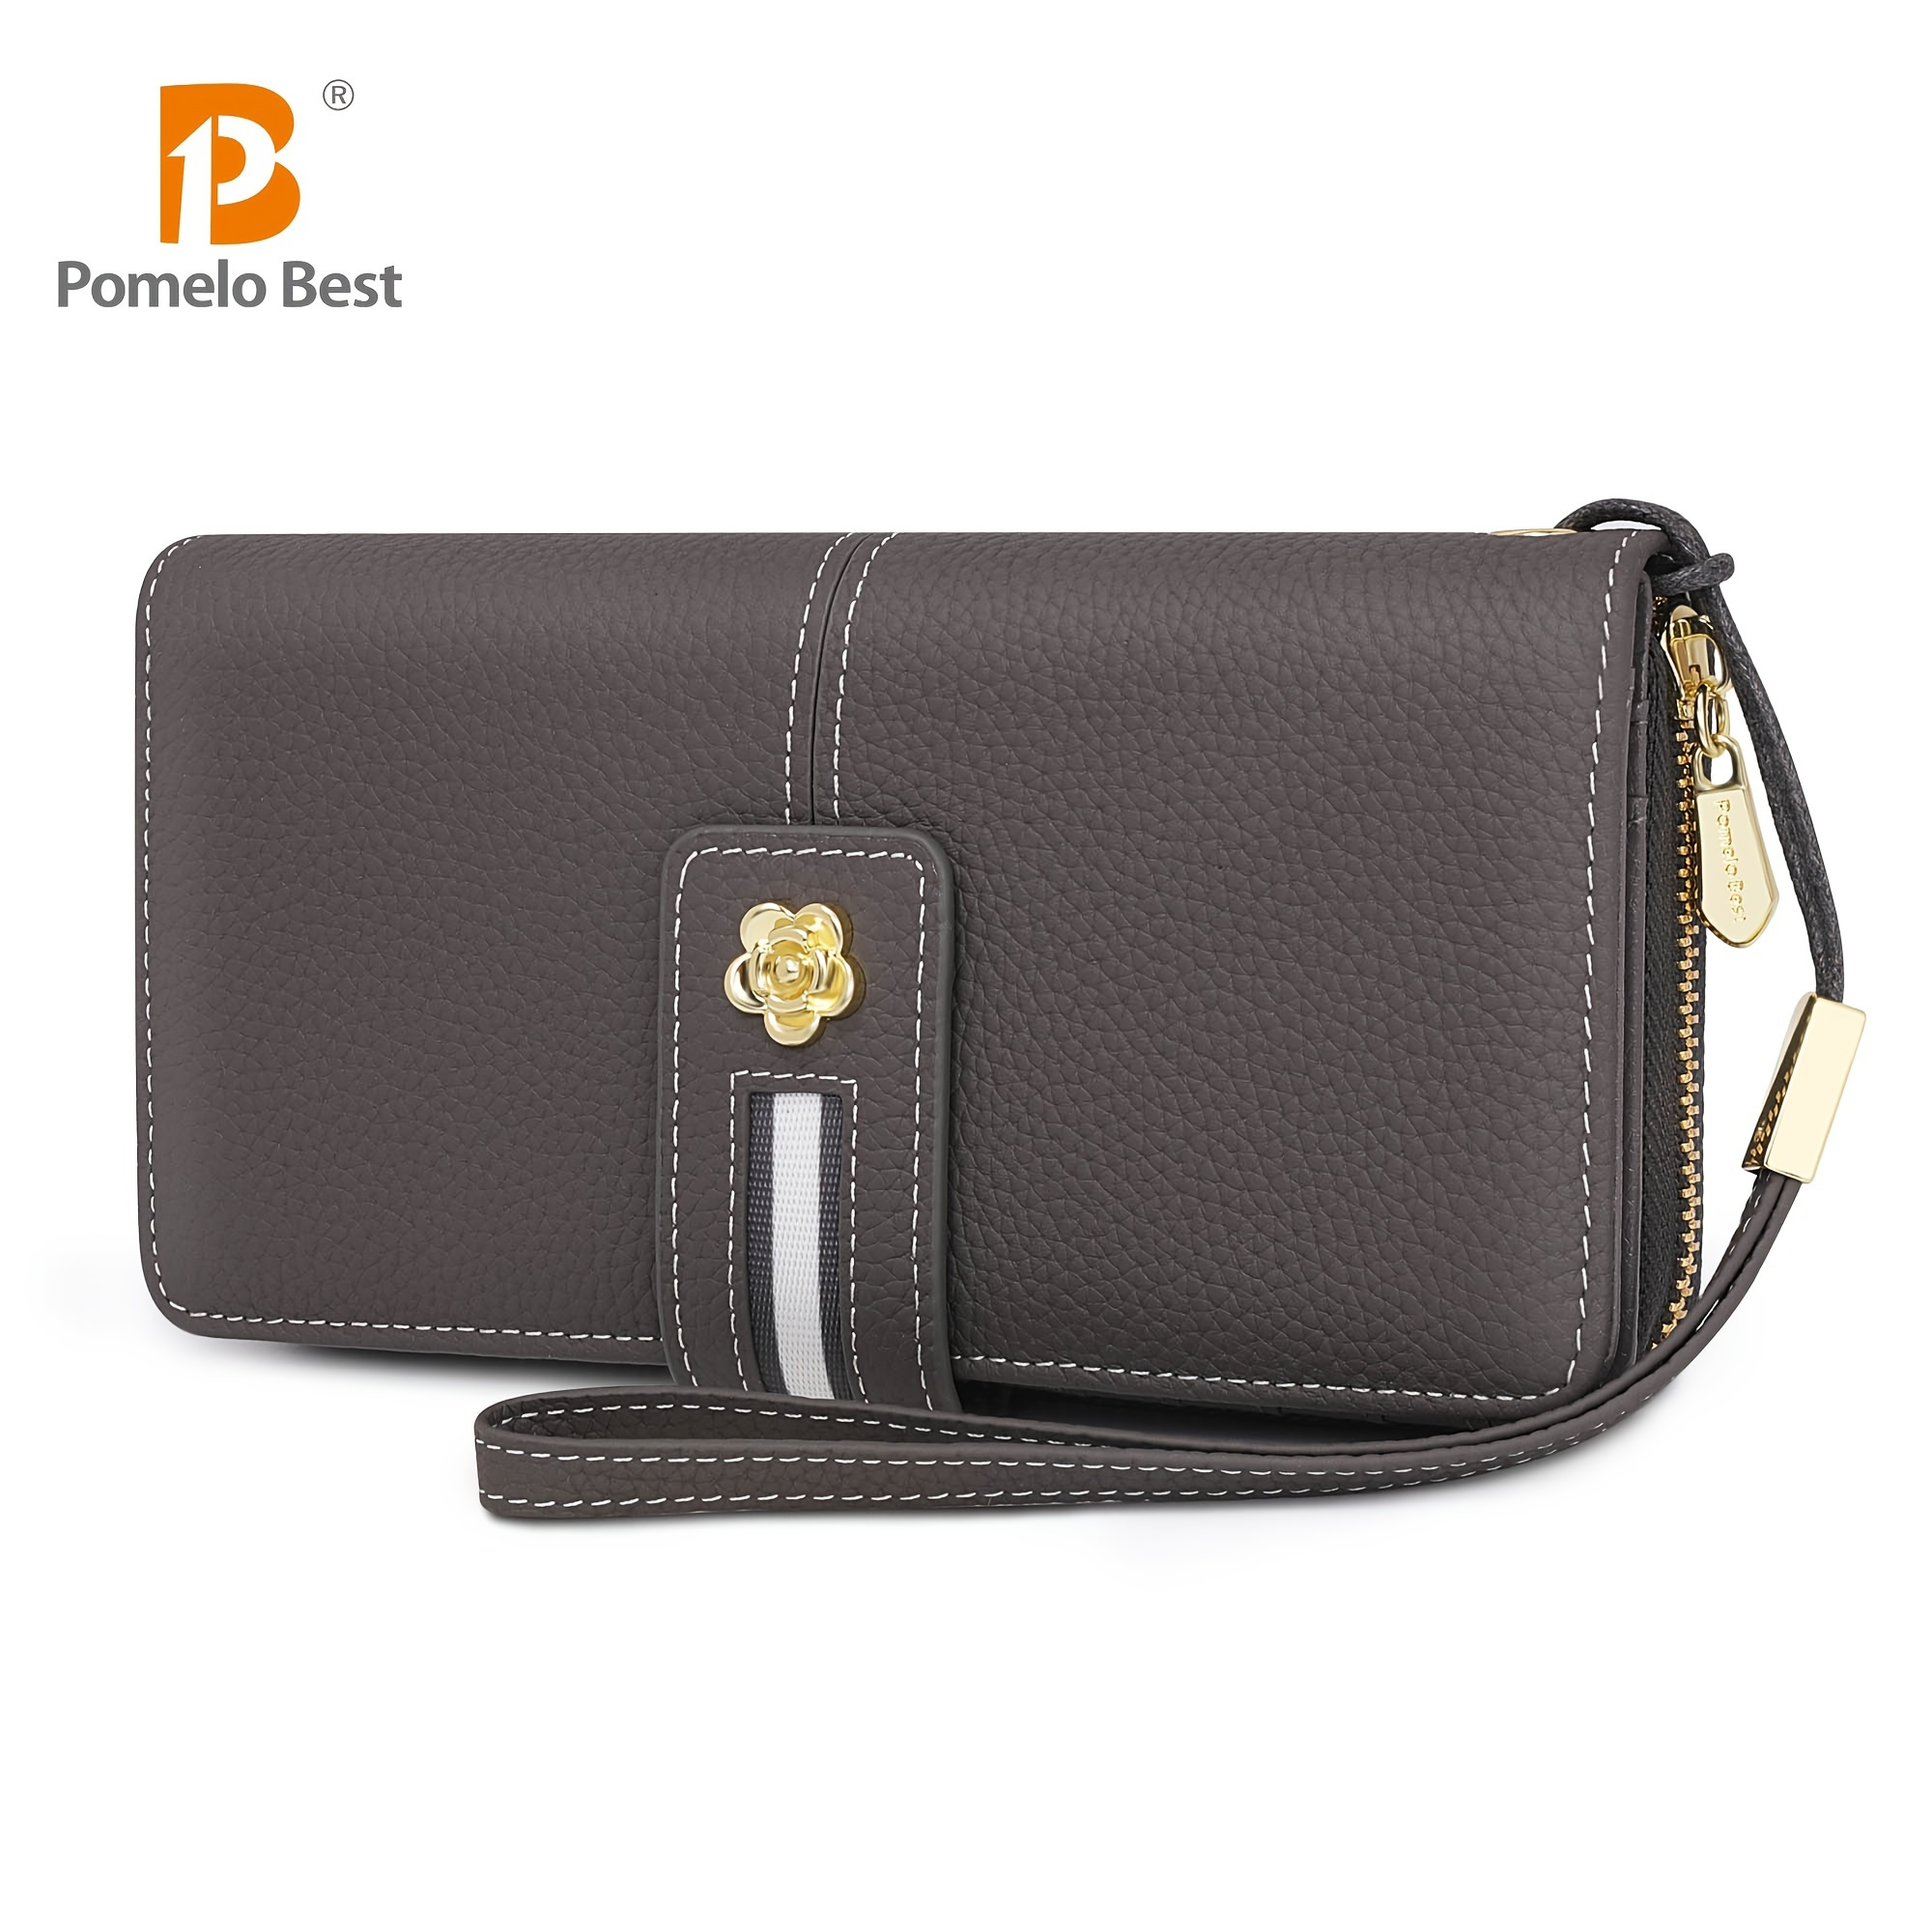 Pomelo Best Crossbody Cell Phone Bag for Women with RFID Blocking